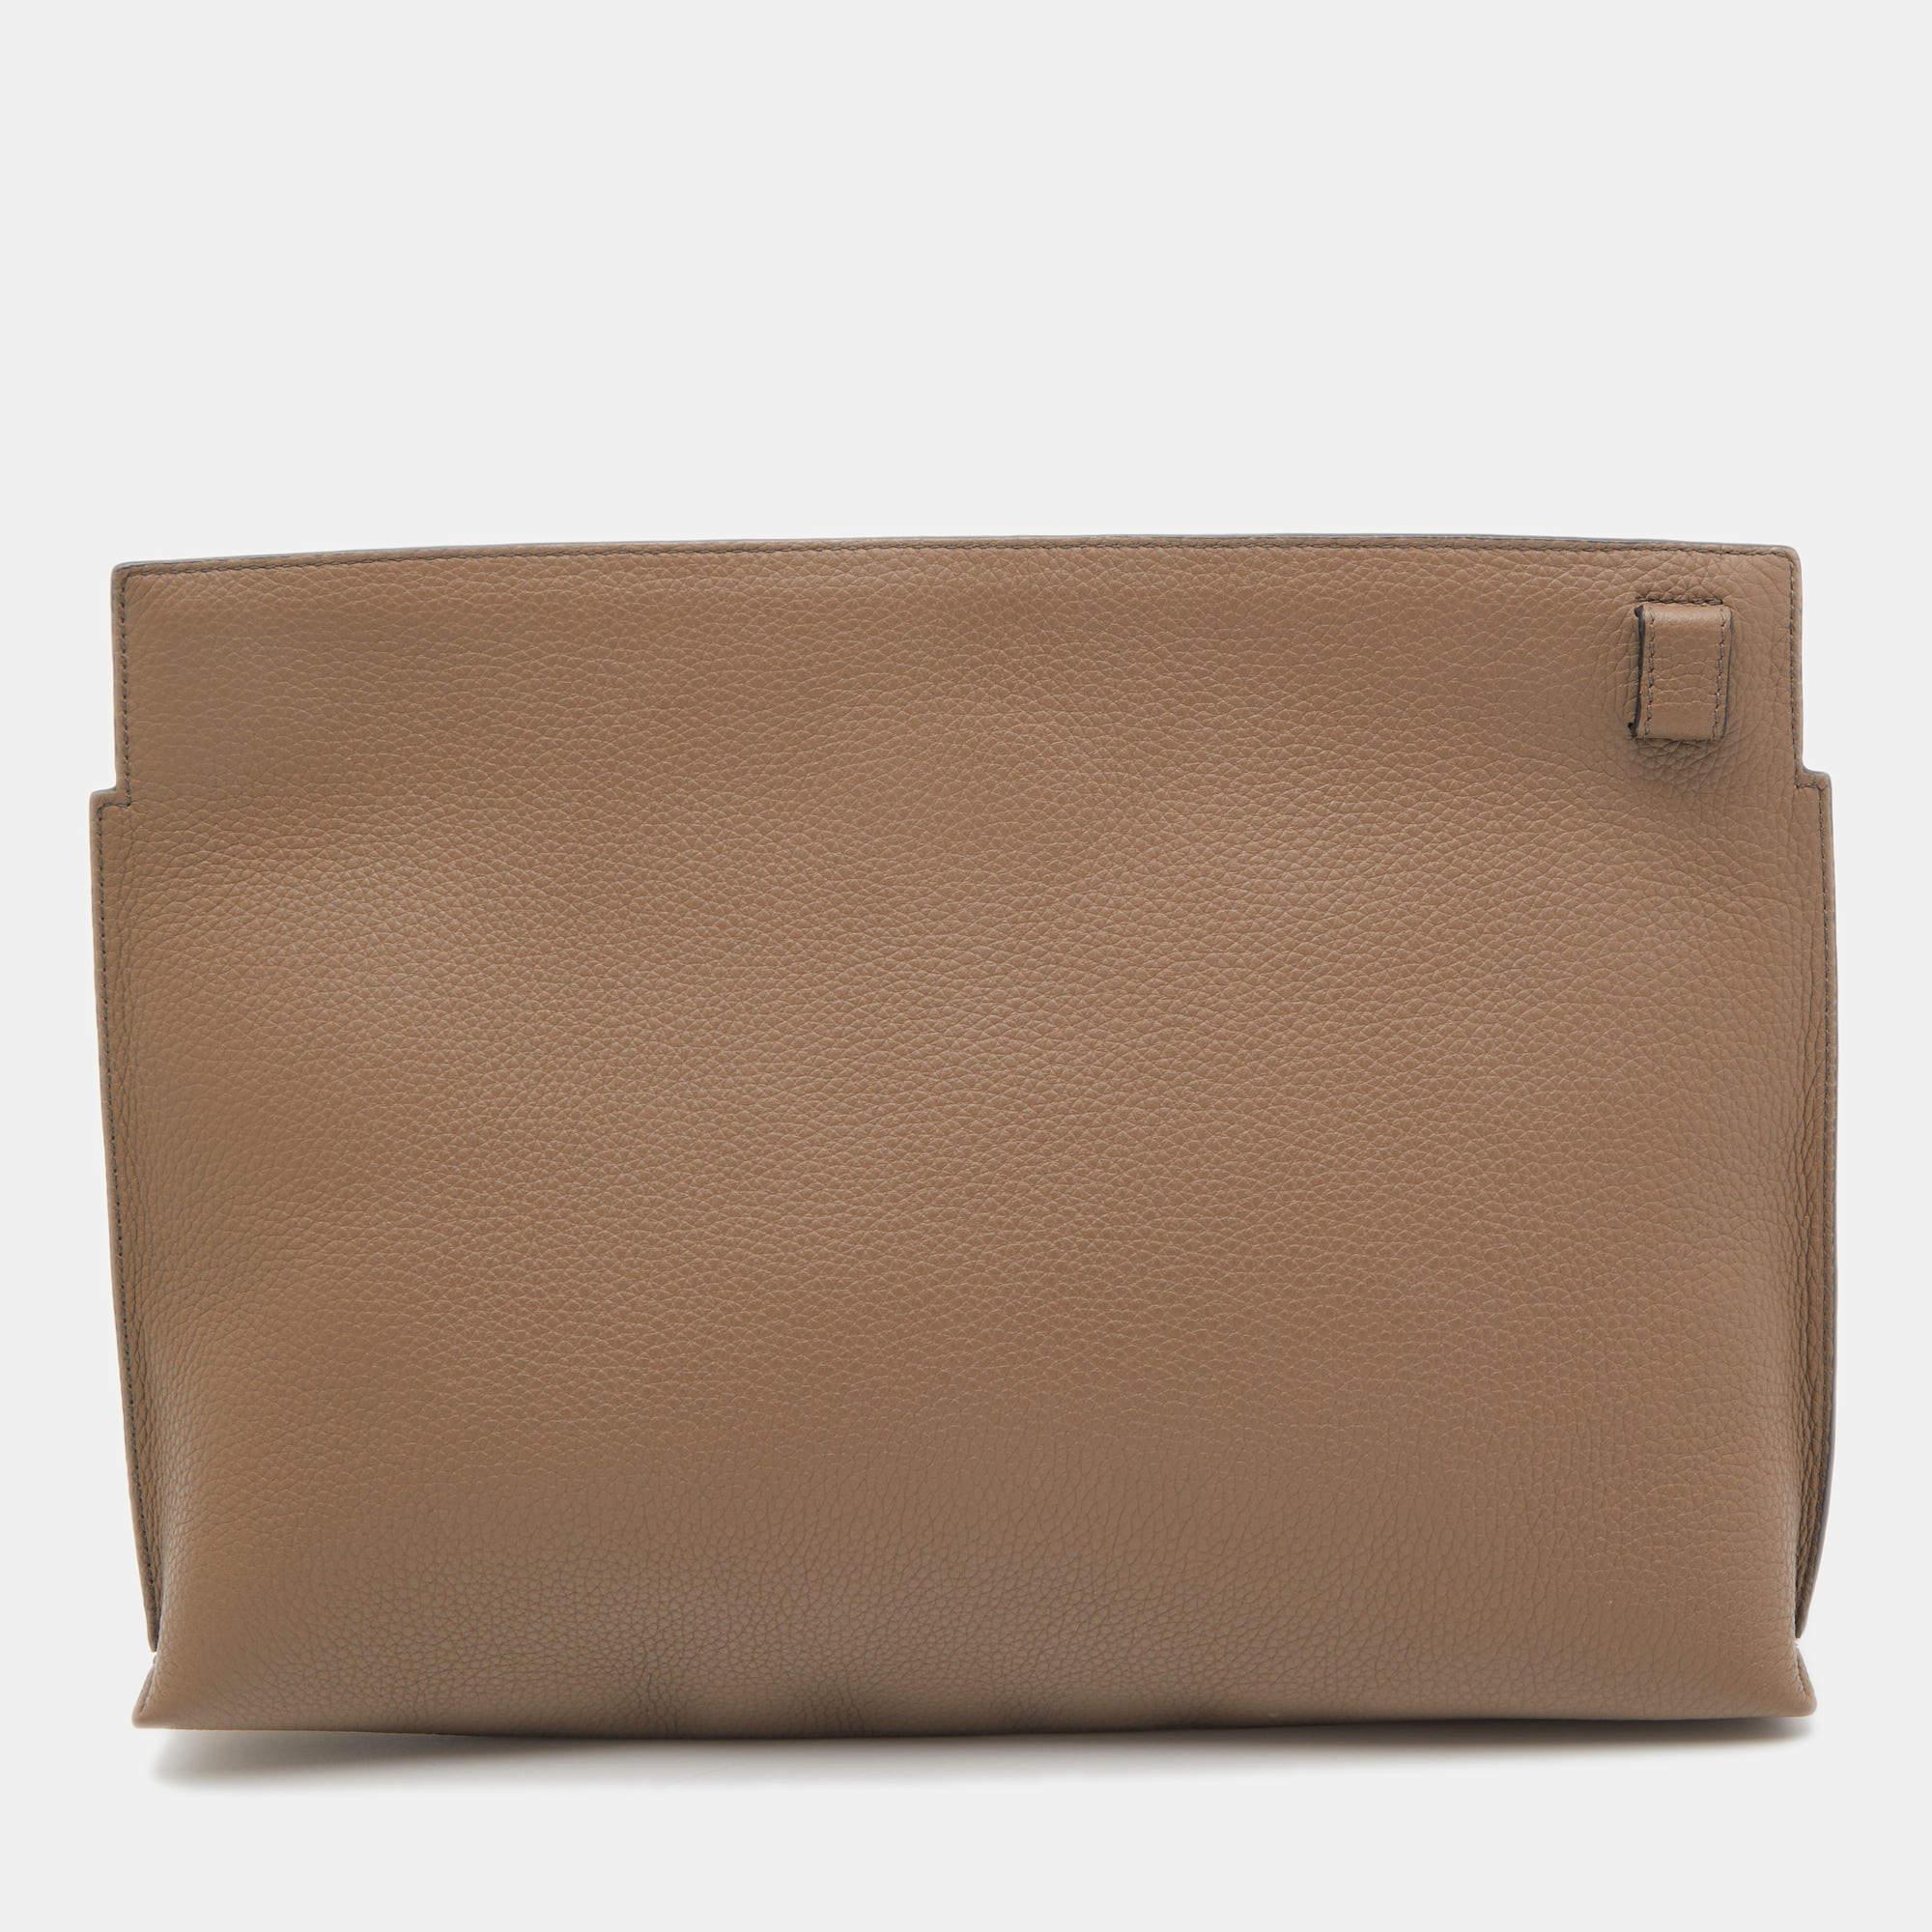 This Loewe pouch is an example of the brand's fine designs that are skillfully crafted to project a classic charm. It is a functional creation with an elevating appeal.

Includes: Original Dustbag, Info Booklet

